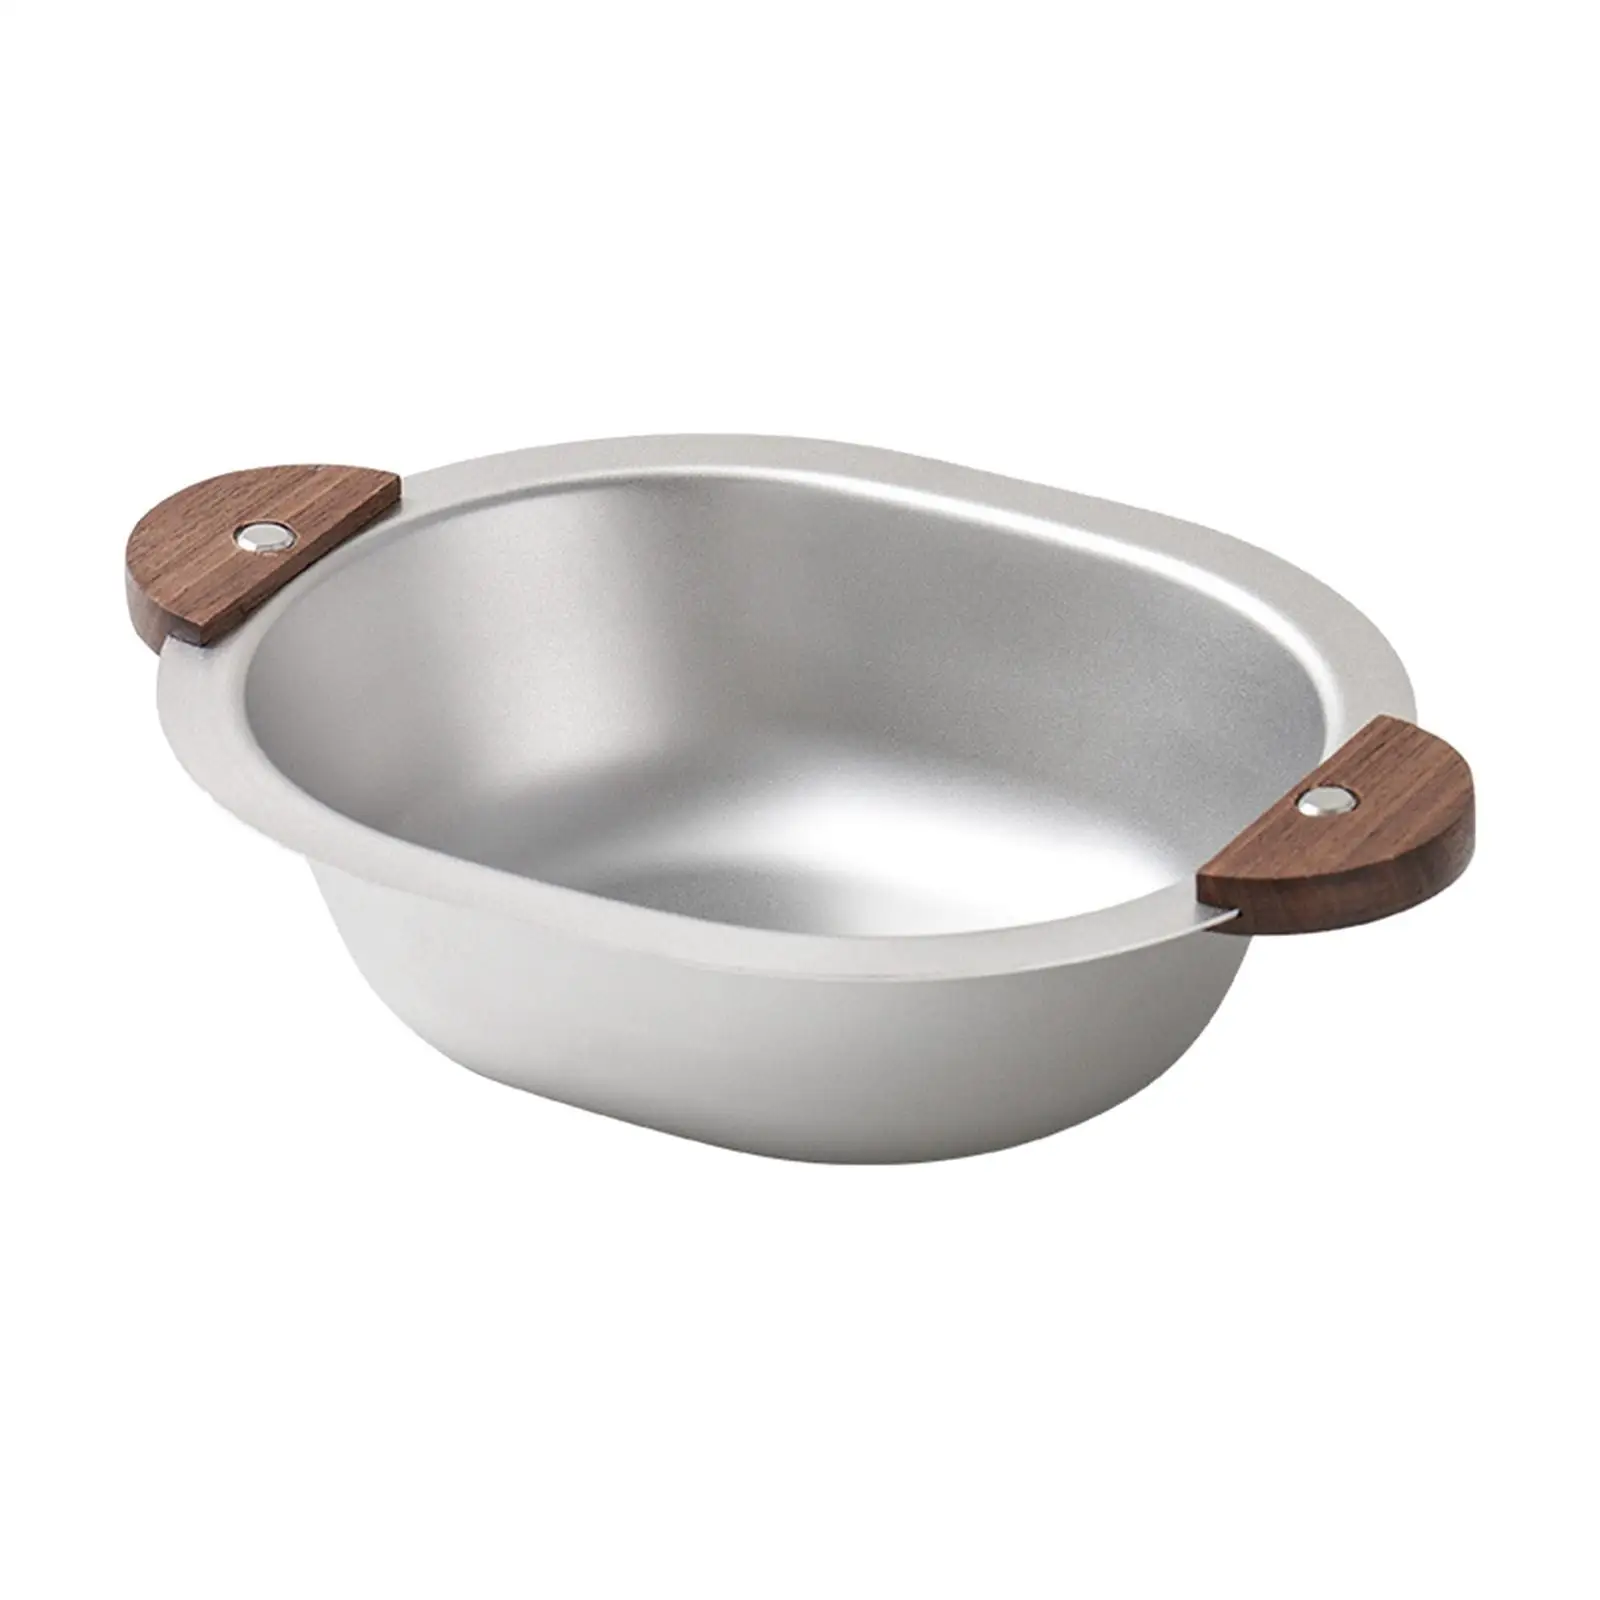 500ml 304 Stainless Steel Bowl Stackable Kitchen Accessory Multipurpose with Wooden handle Serving Bowl for Snacks Fruit Rice